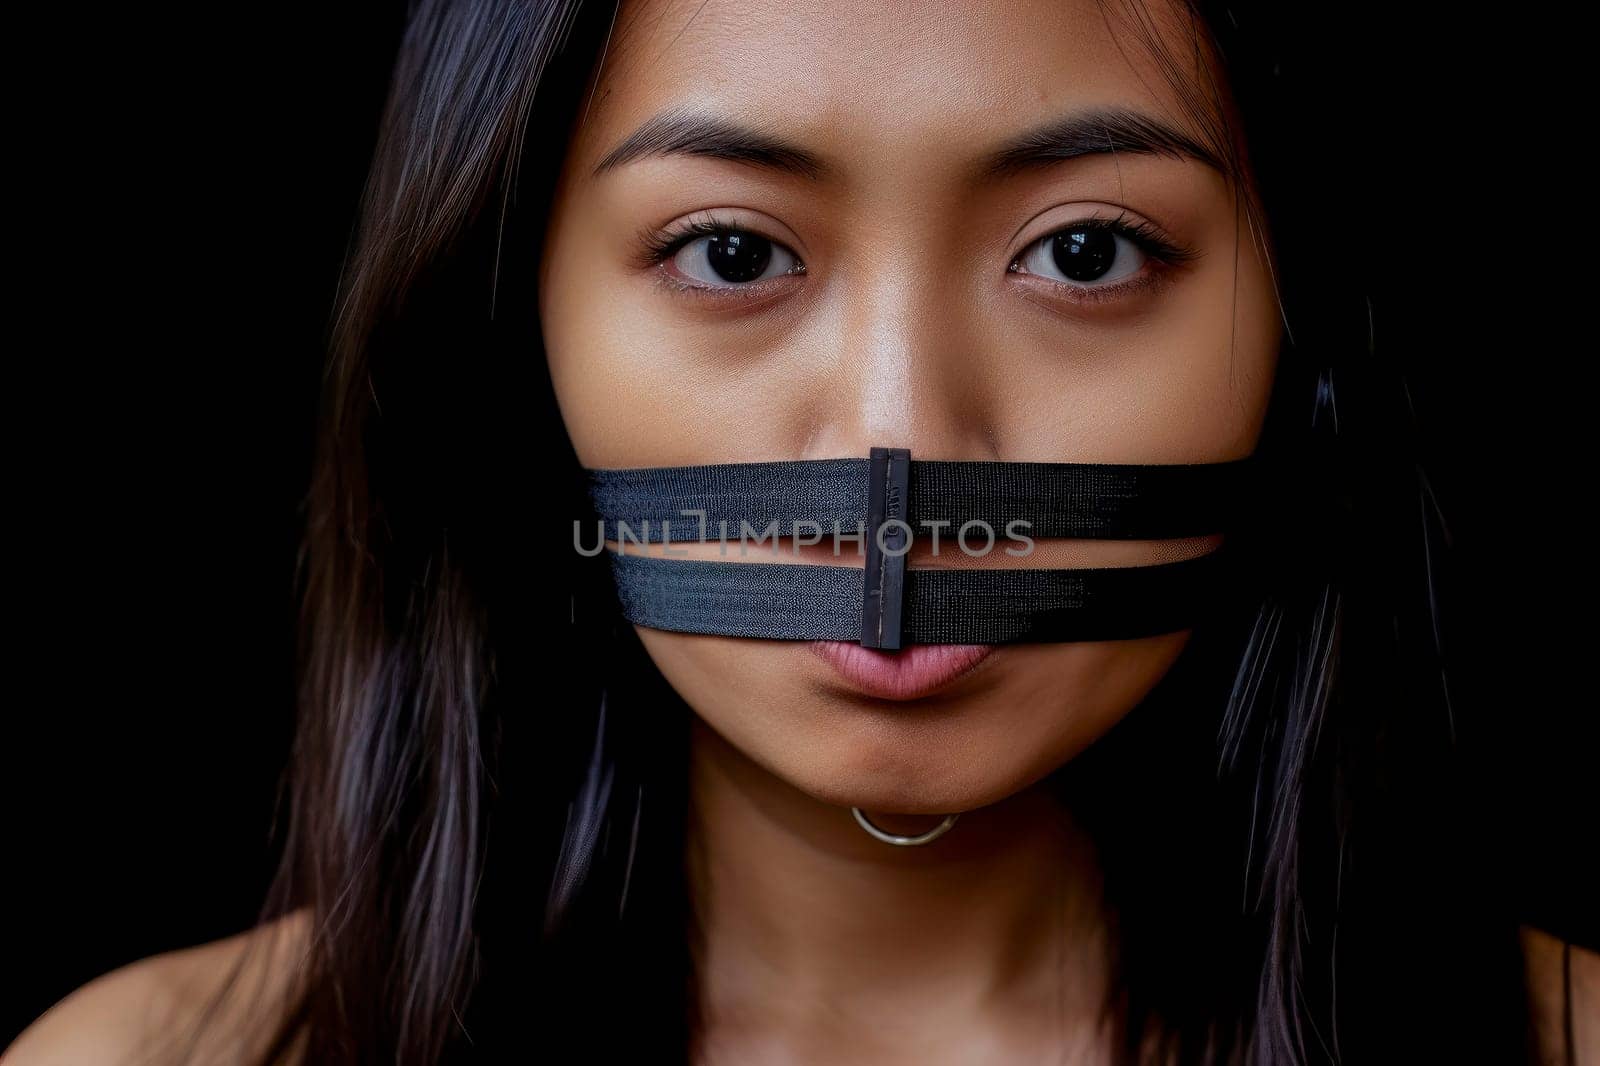 Gagged Woman, Symbol of Censorship by pippocarlot